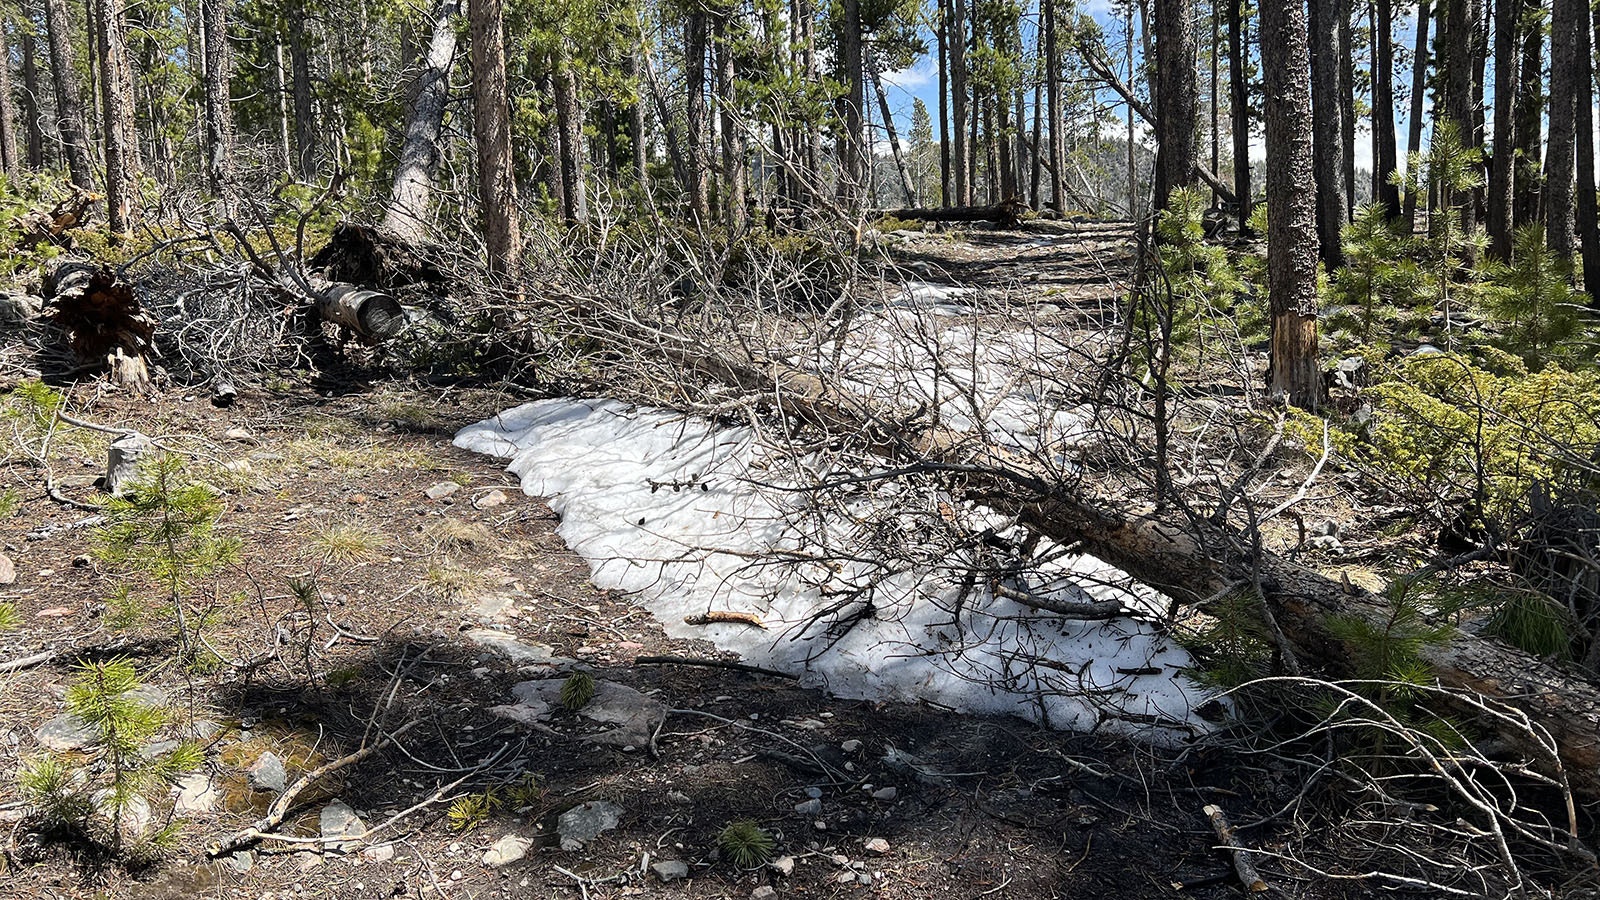 Fallen trees, blown down by recent severe winds, are a common sight on trails in the Medicine Bow National Forest near Laramie.